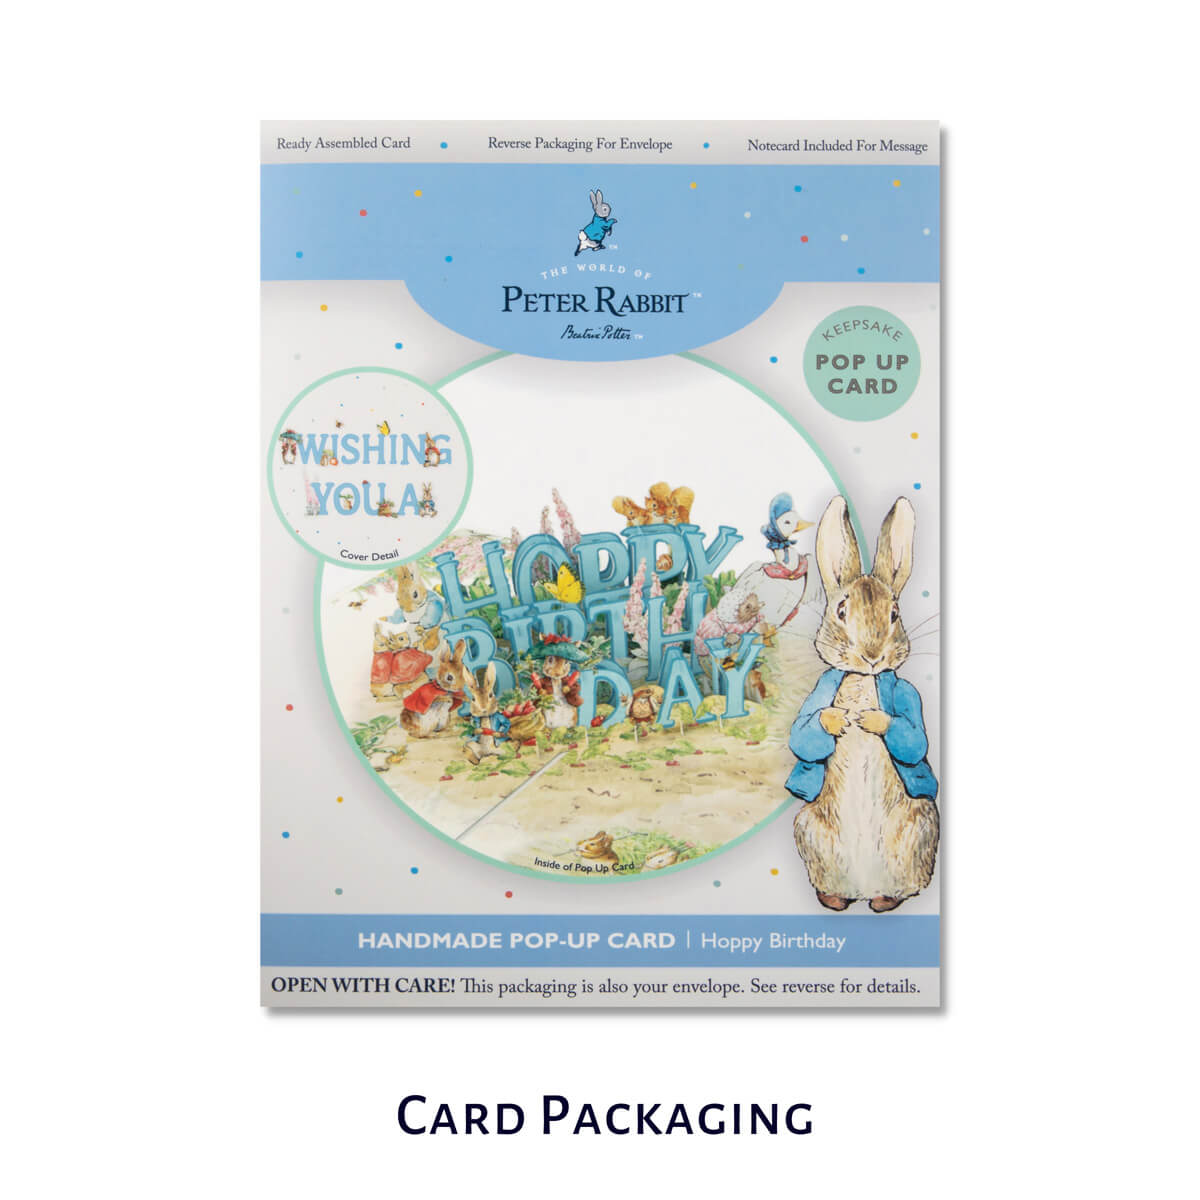 officially licensed Peter Rabbit Birthday Pop Up Card packaging